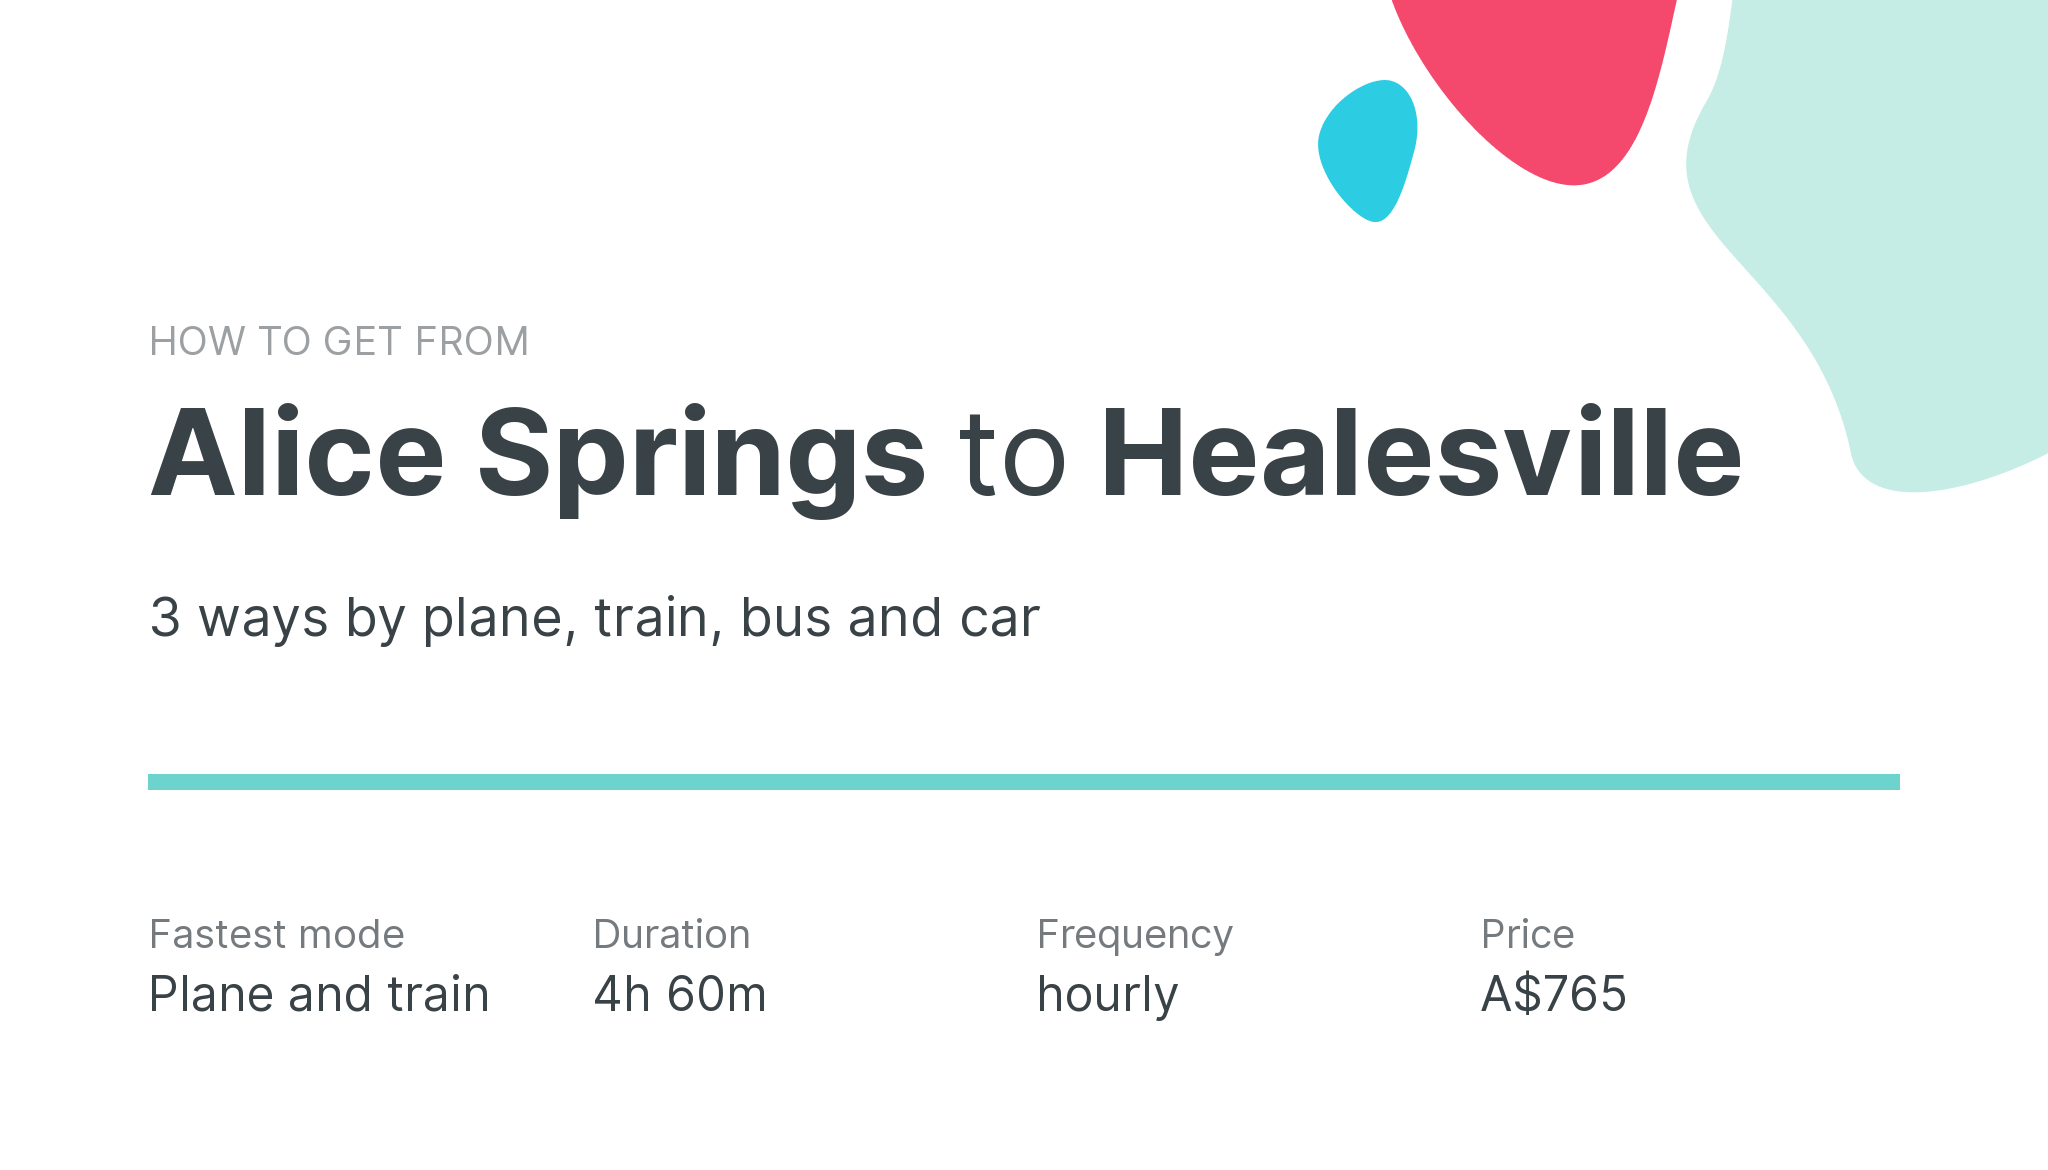 How do I get from Alice Springs to Healesville